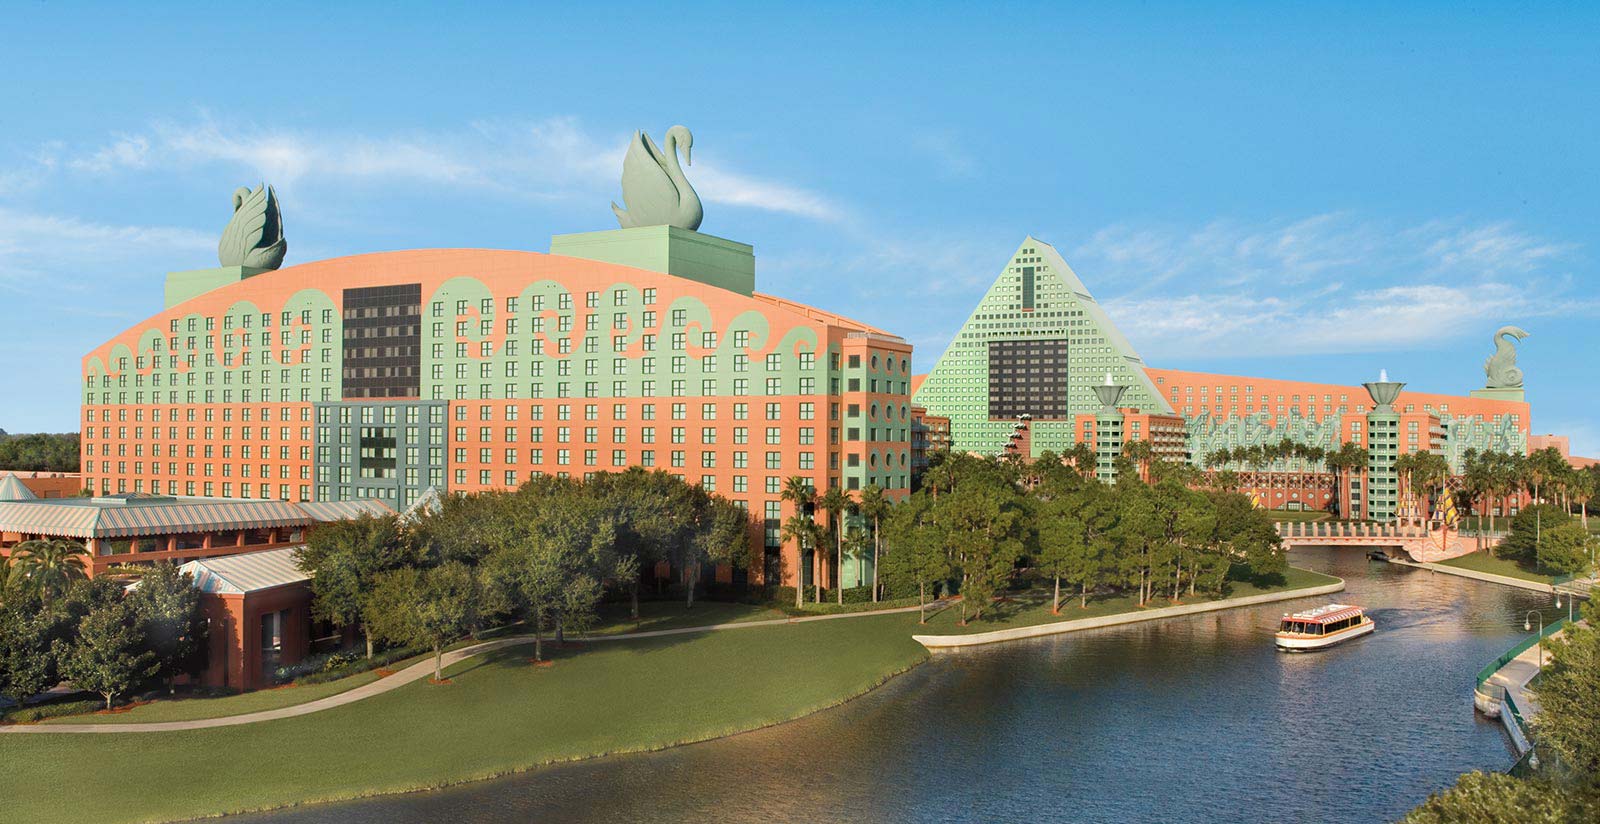 Major League Soccer teams to stay at Disney’s Swan & Dolphin Resort